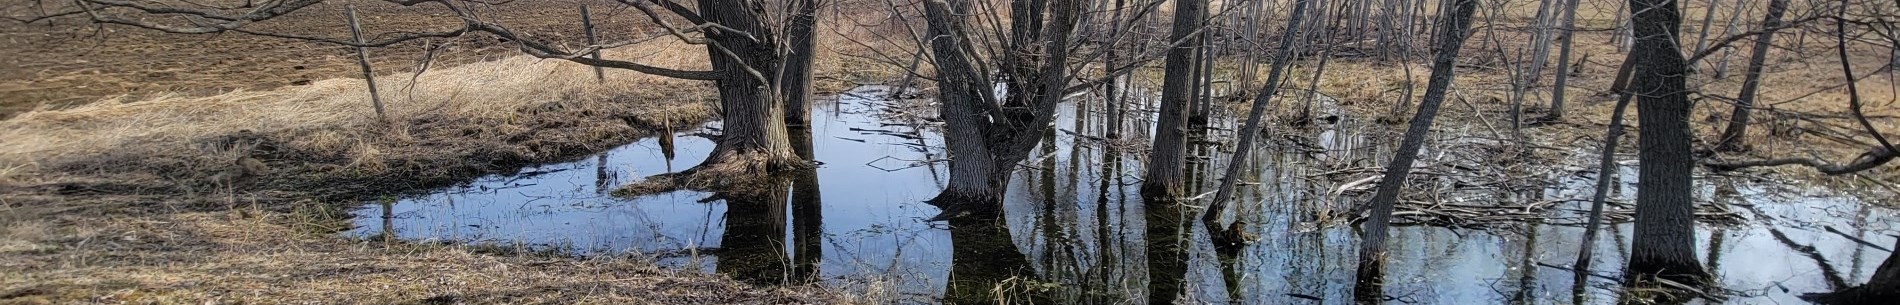 Trees in standing water